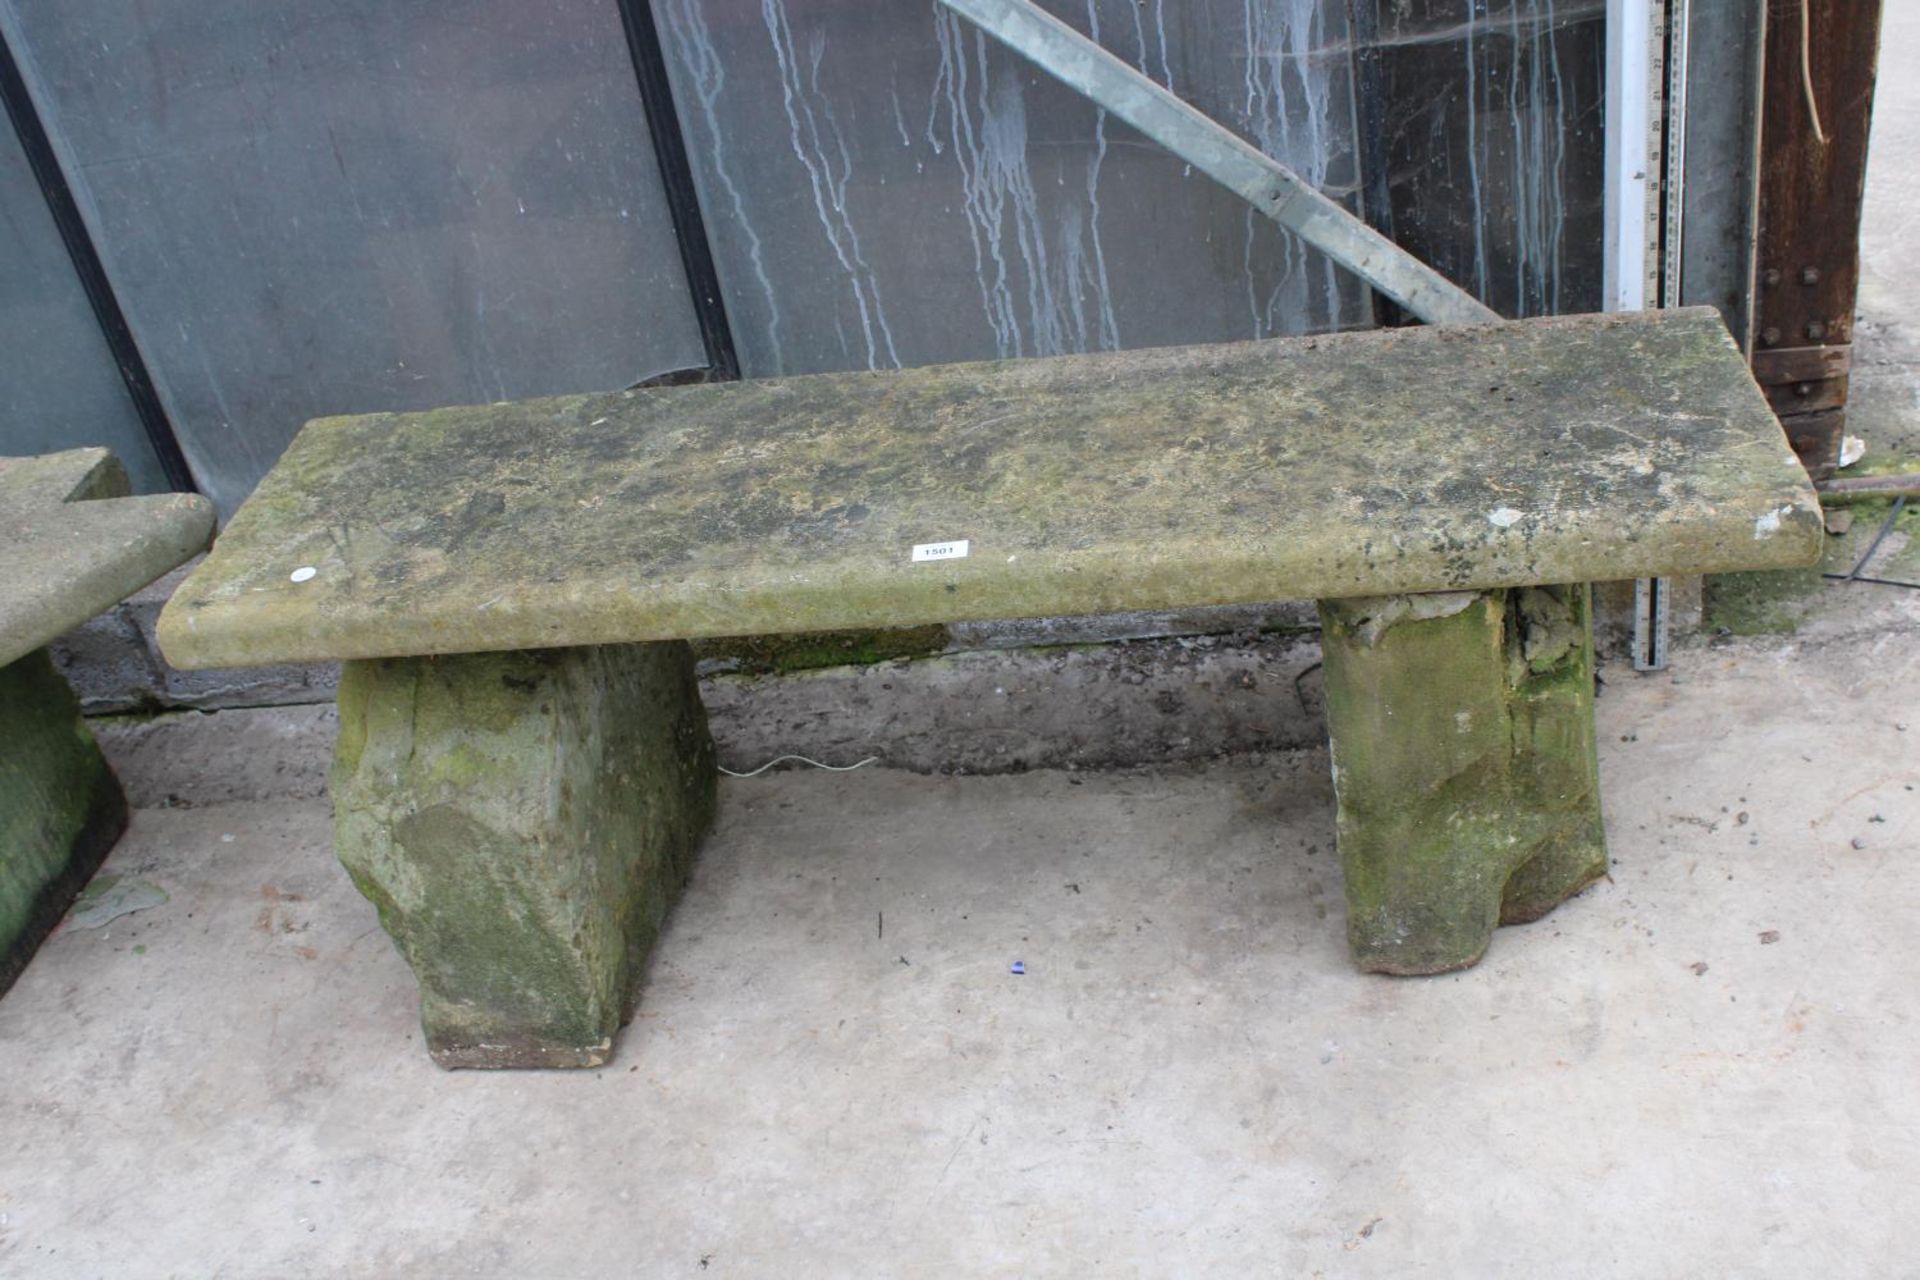 A YORK STONE BENCH WITH TWO PEDESTAL BASES (L:118CM)